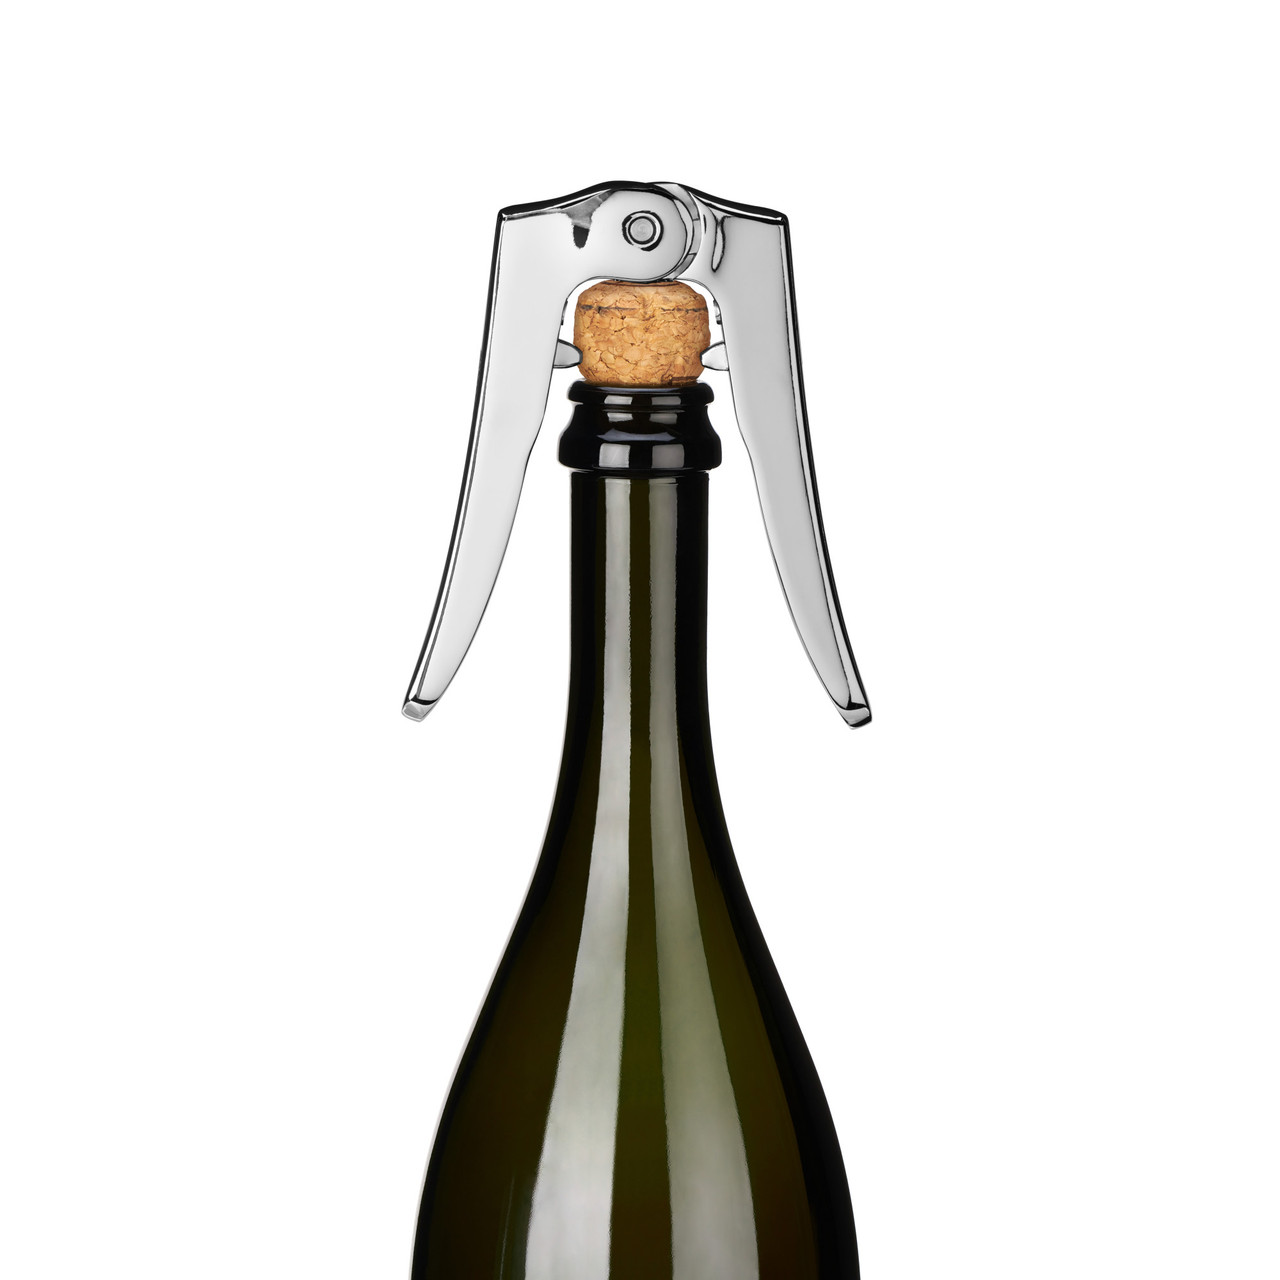 Champagne Cork Puller by True